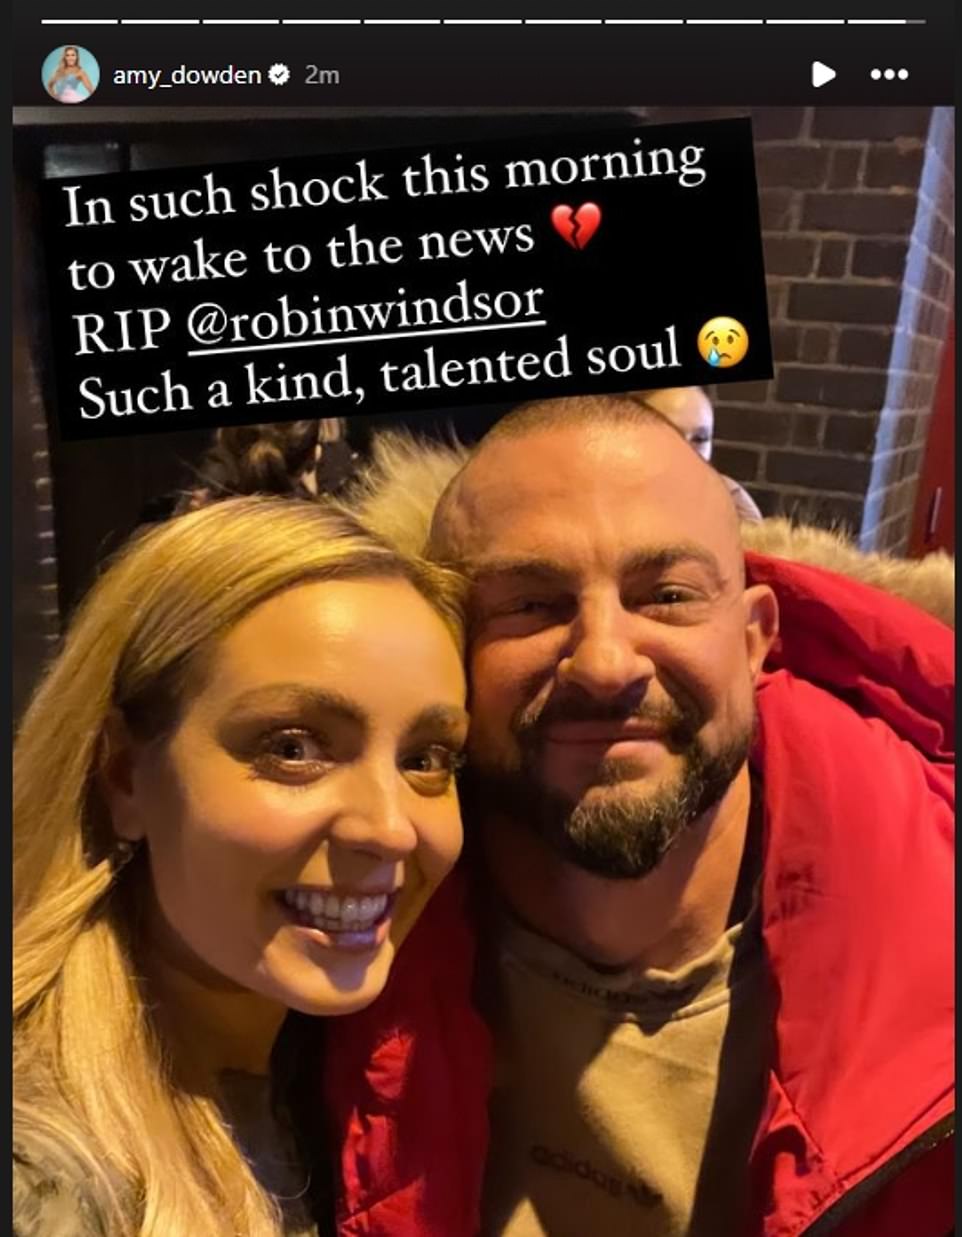 a gentleman to the end: how 'depressed' strictly star robin windsor 'struggled to get out of bed' amid injury, relationship and money woes but bravely spent his final weeks bringing joy to others as fans share their touching moments with the star